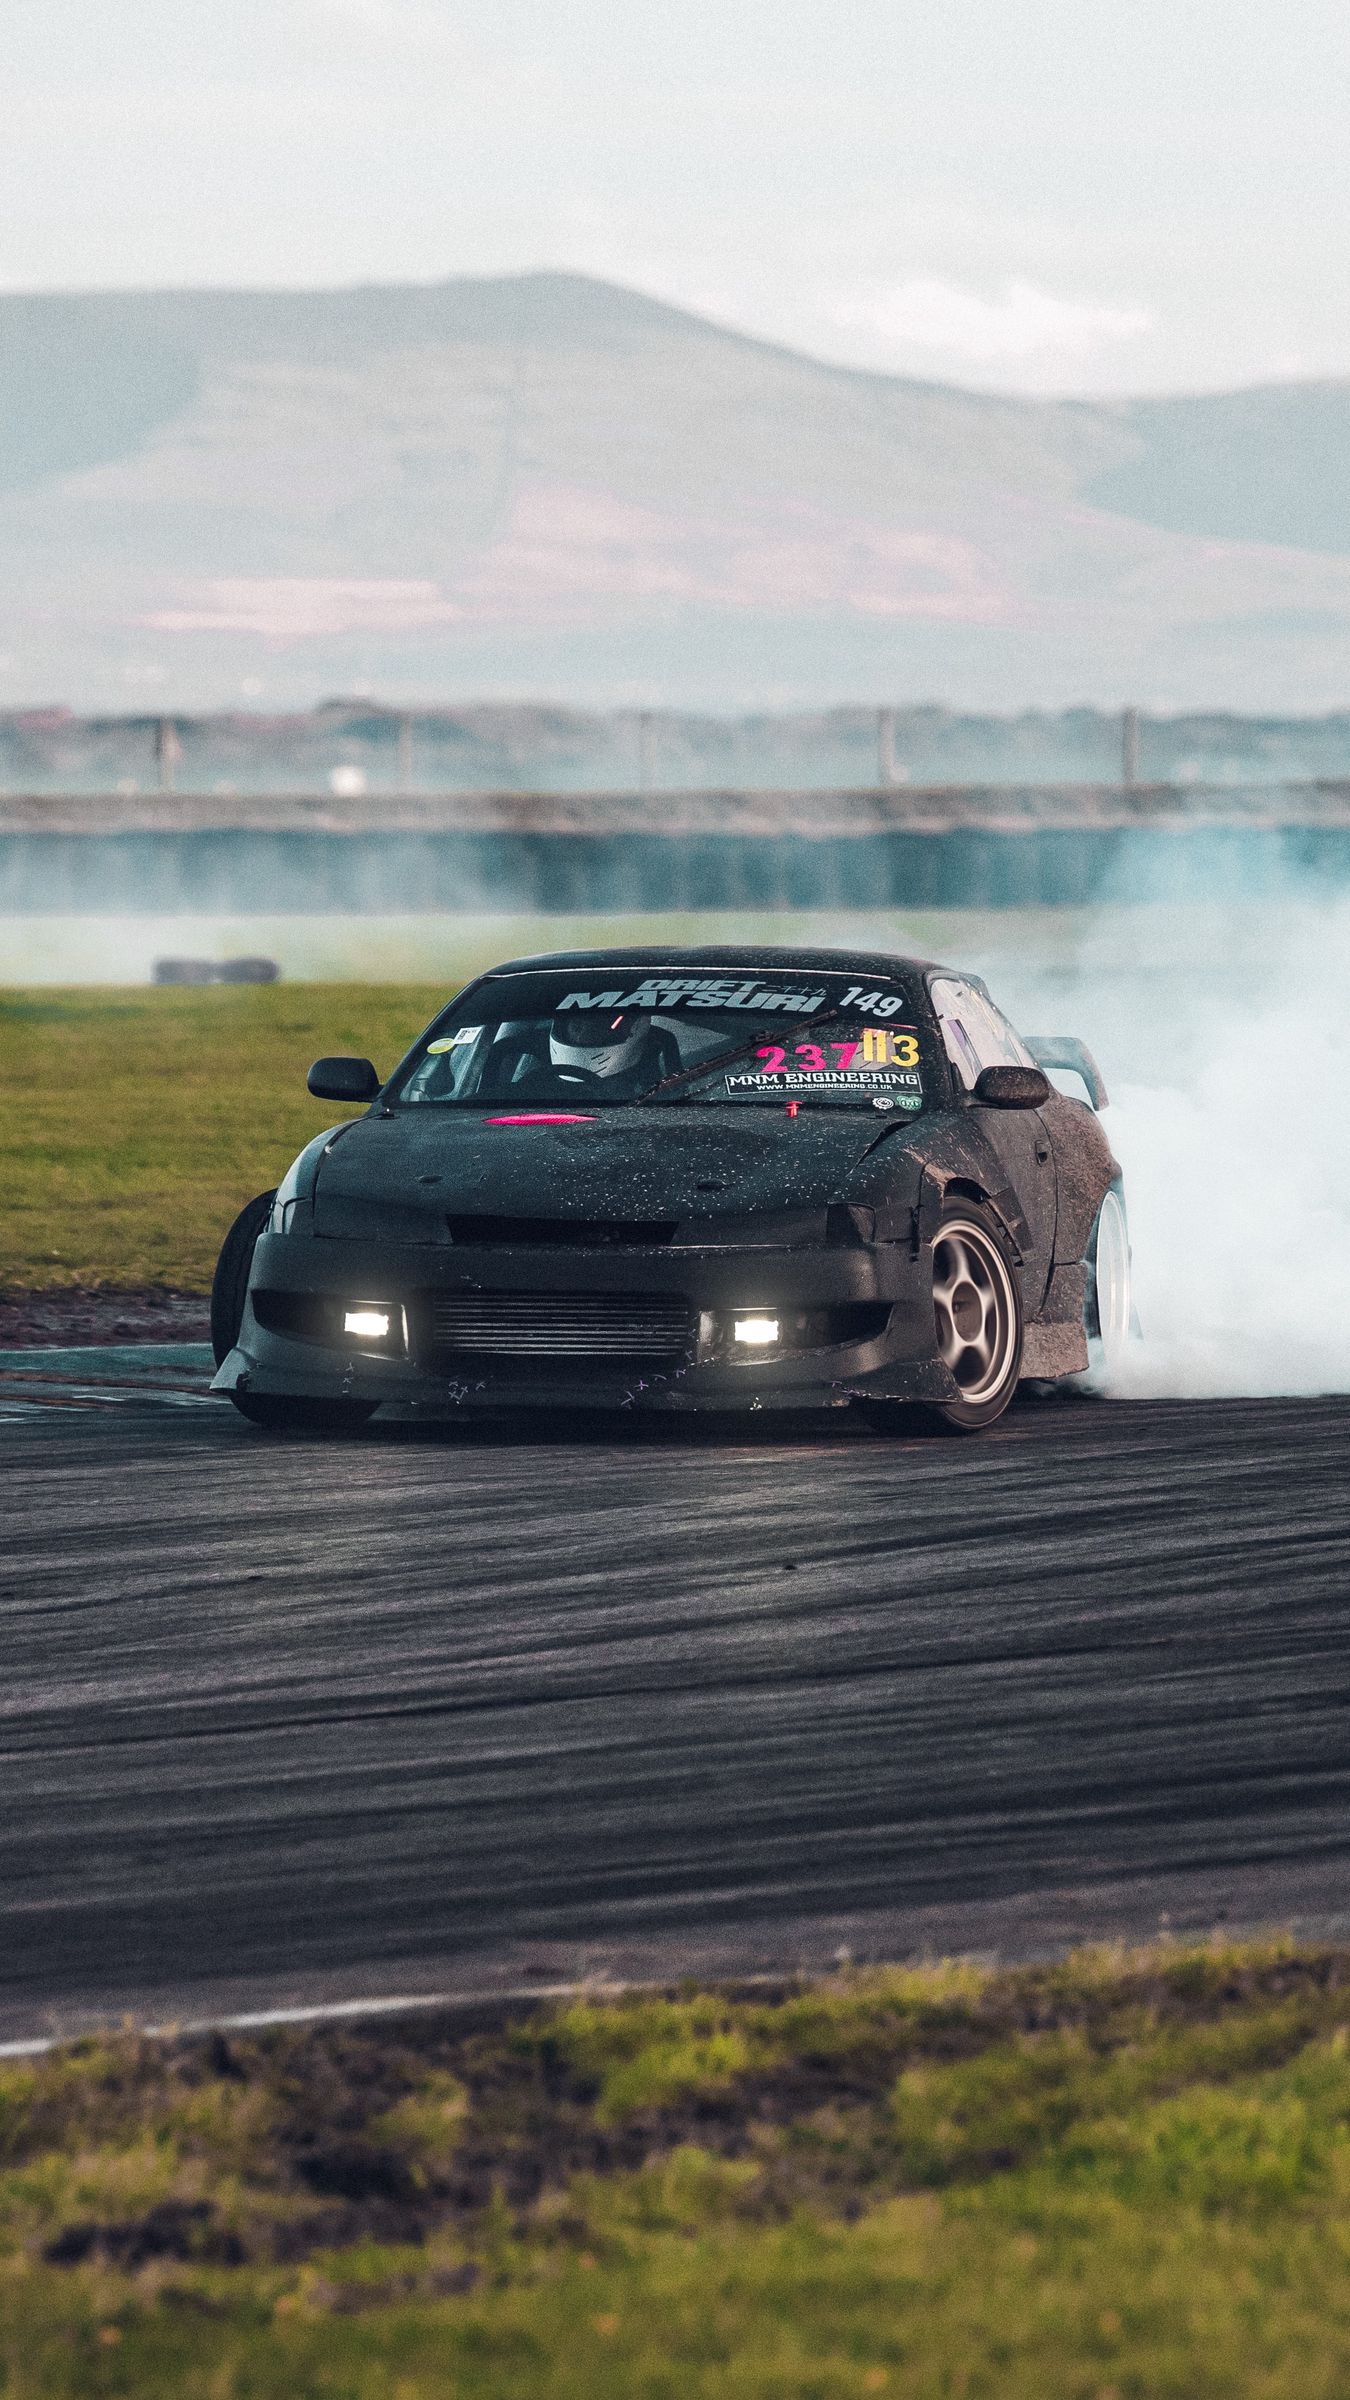 Drifting Photos Download The BEST Free Drifting Stock Photos  HD Images